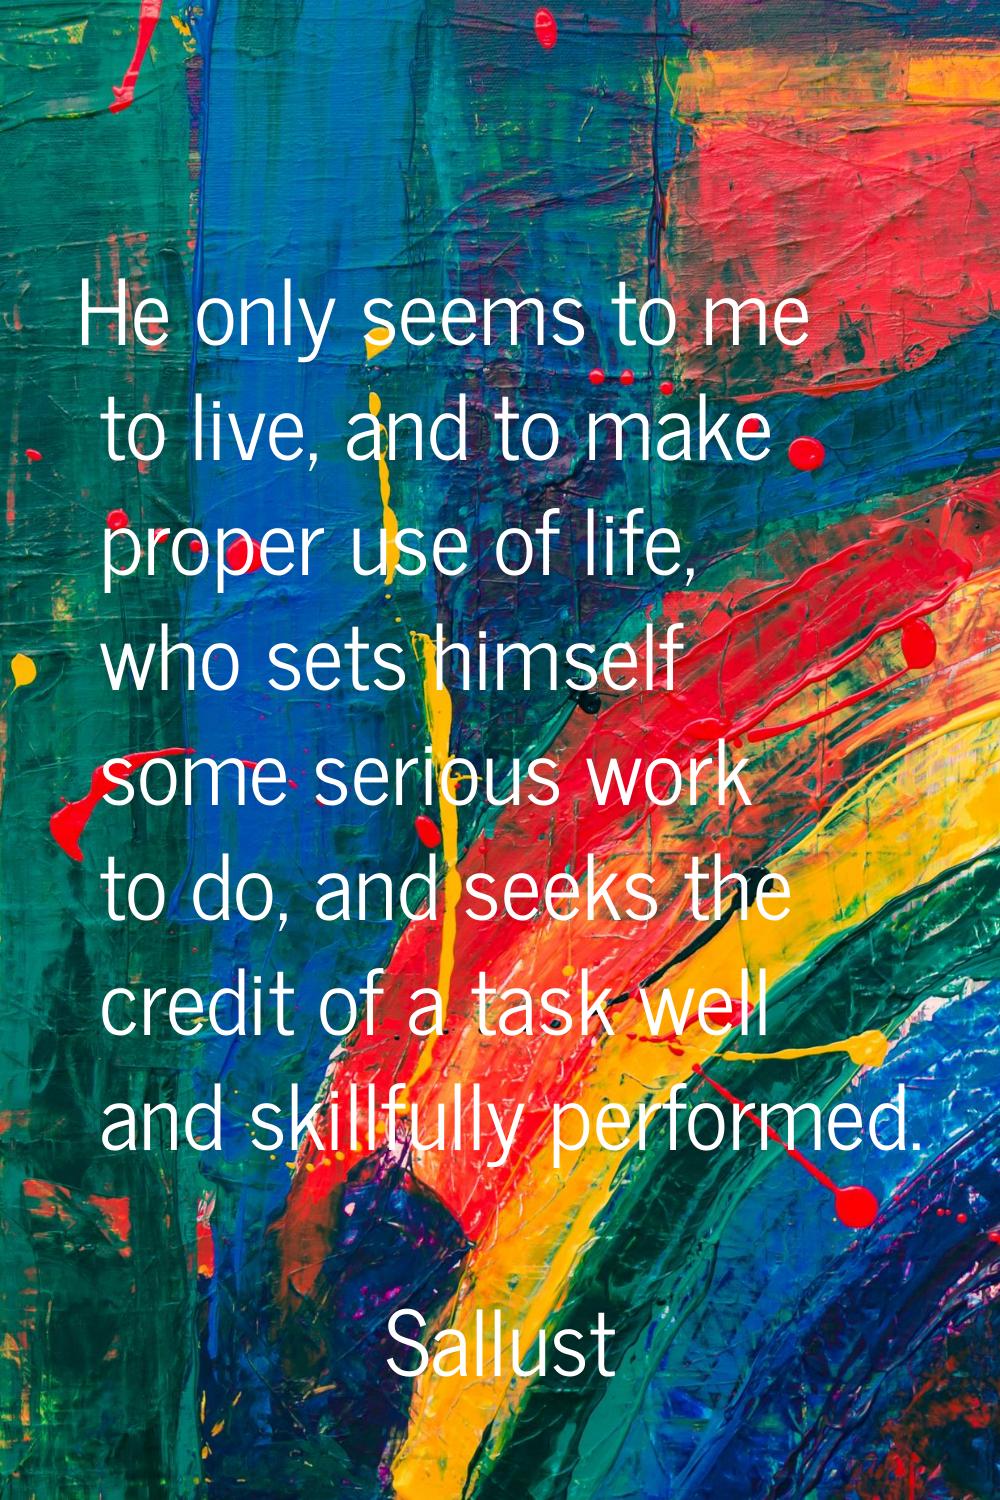 He only seems to me to live, and to make proper use of life, who sets himself some serious work to 